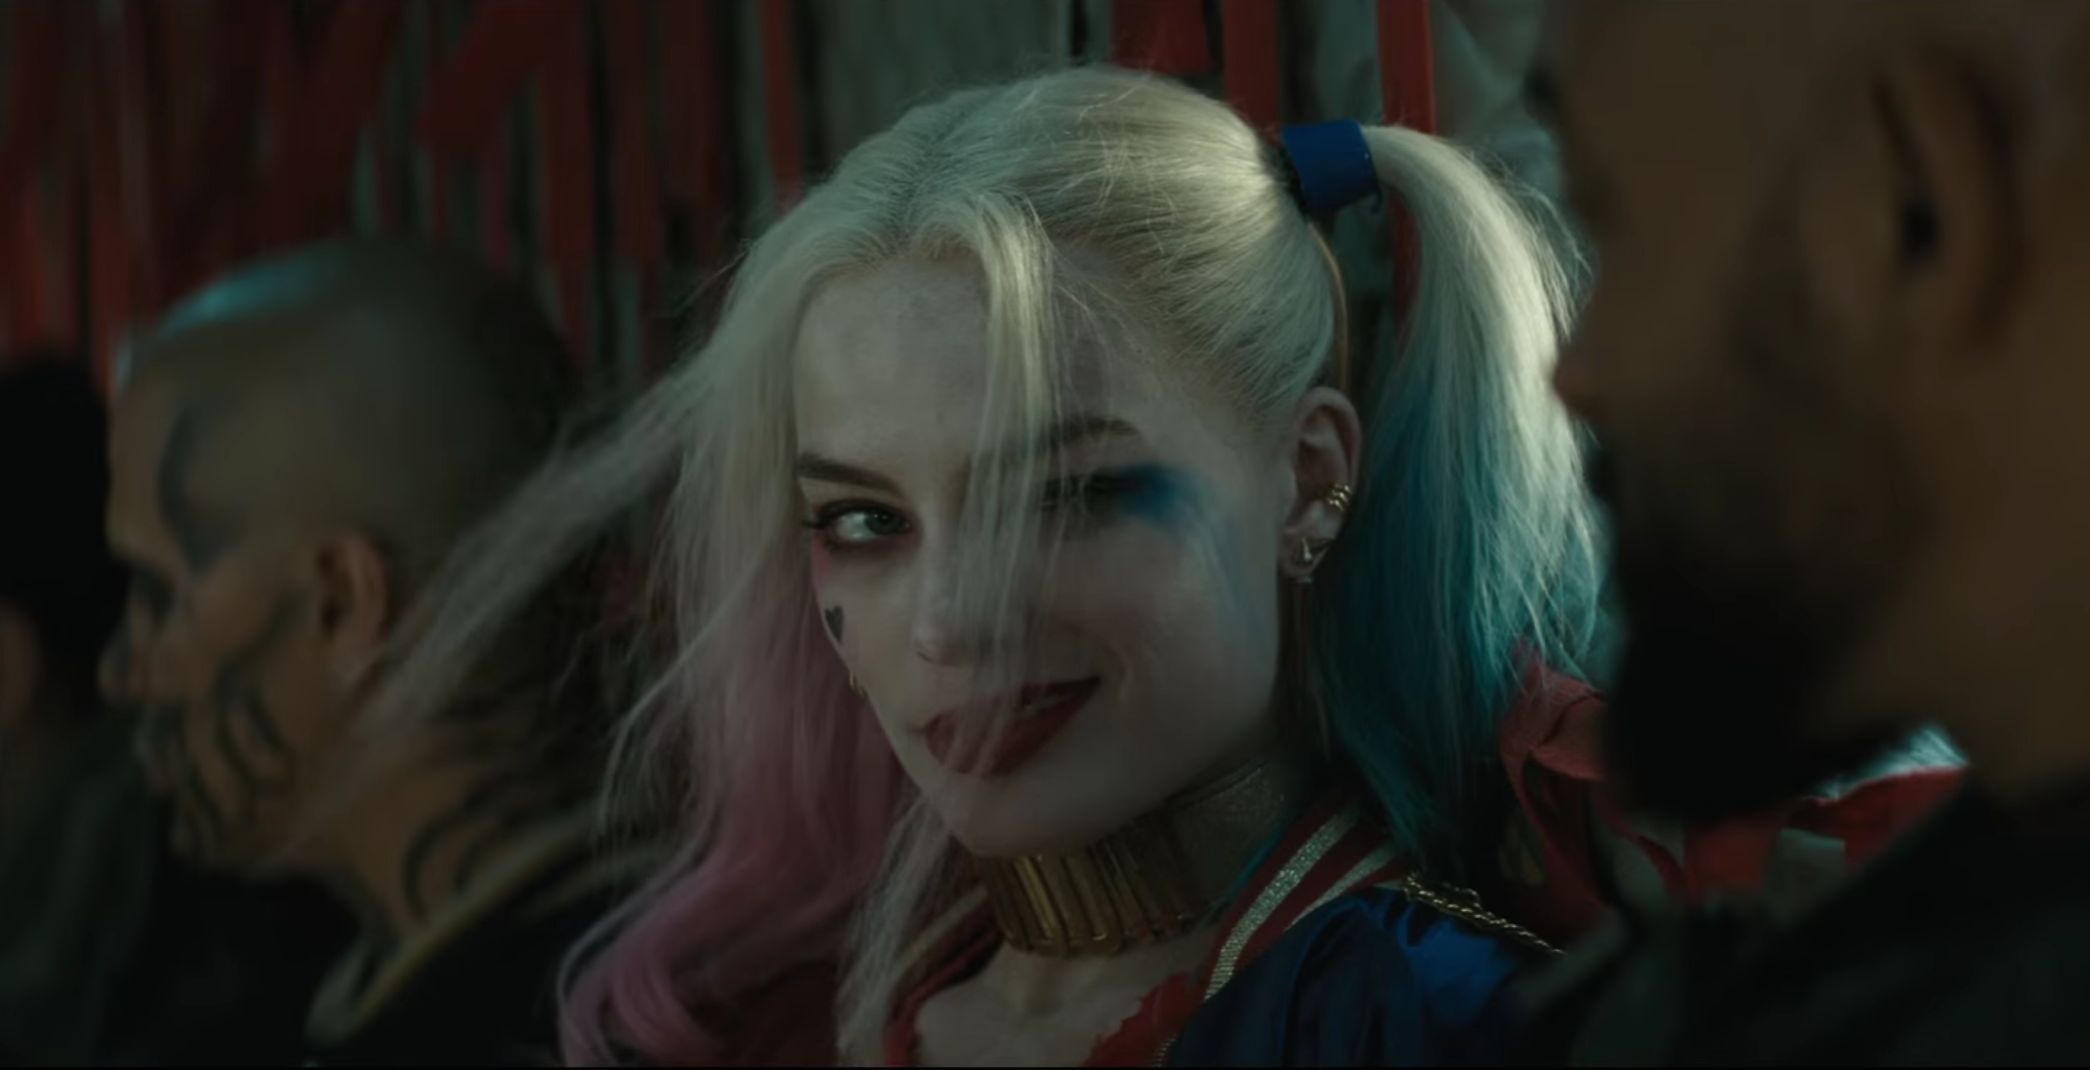 harley quinn, movie, suicide squad, margot robbie, two toned hair, wink 1080p